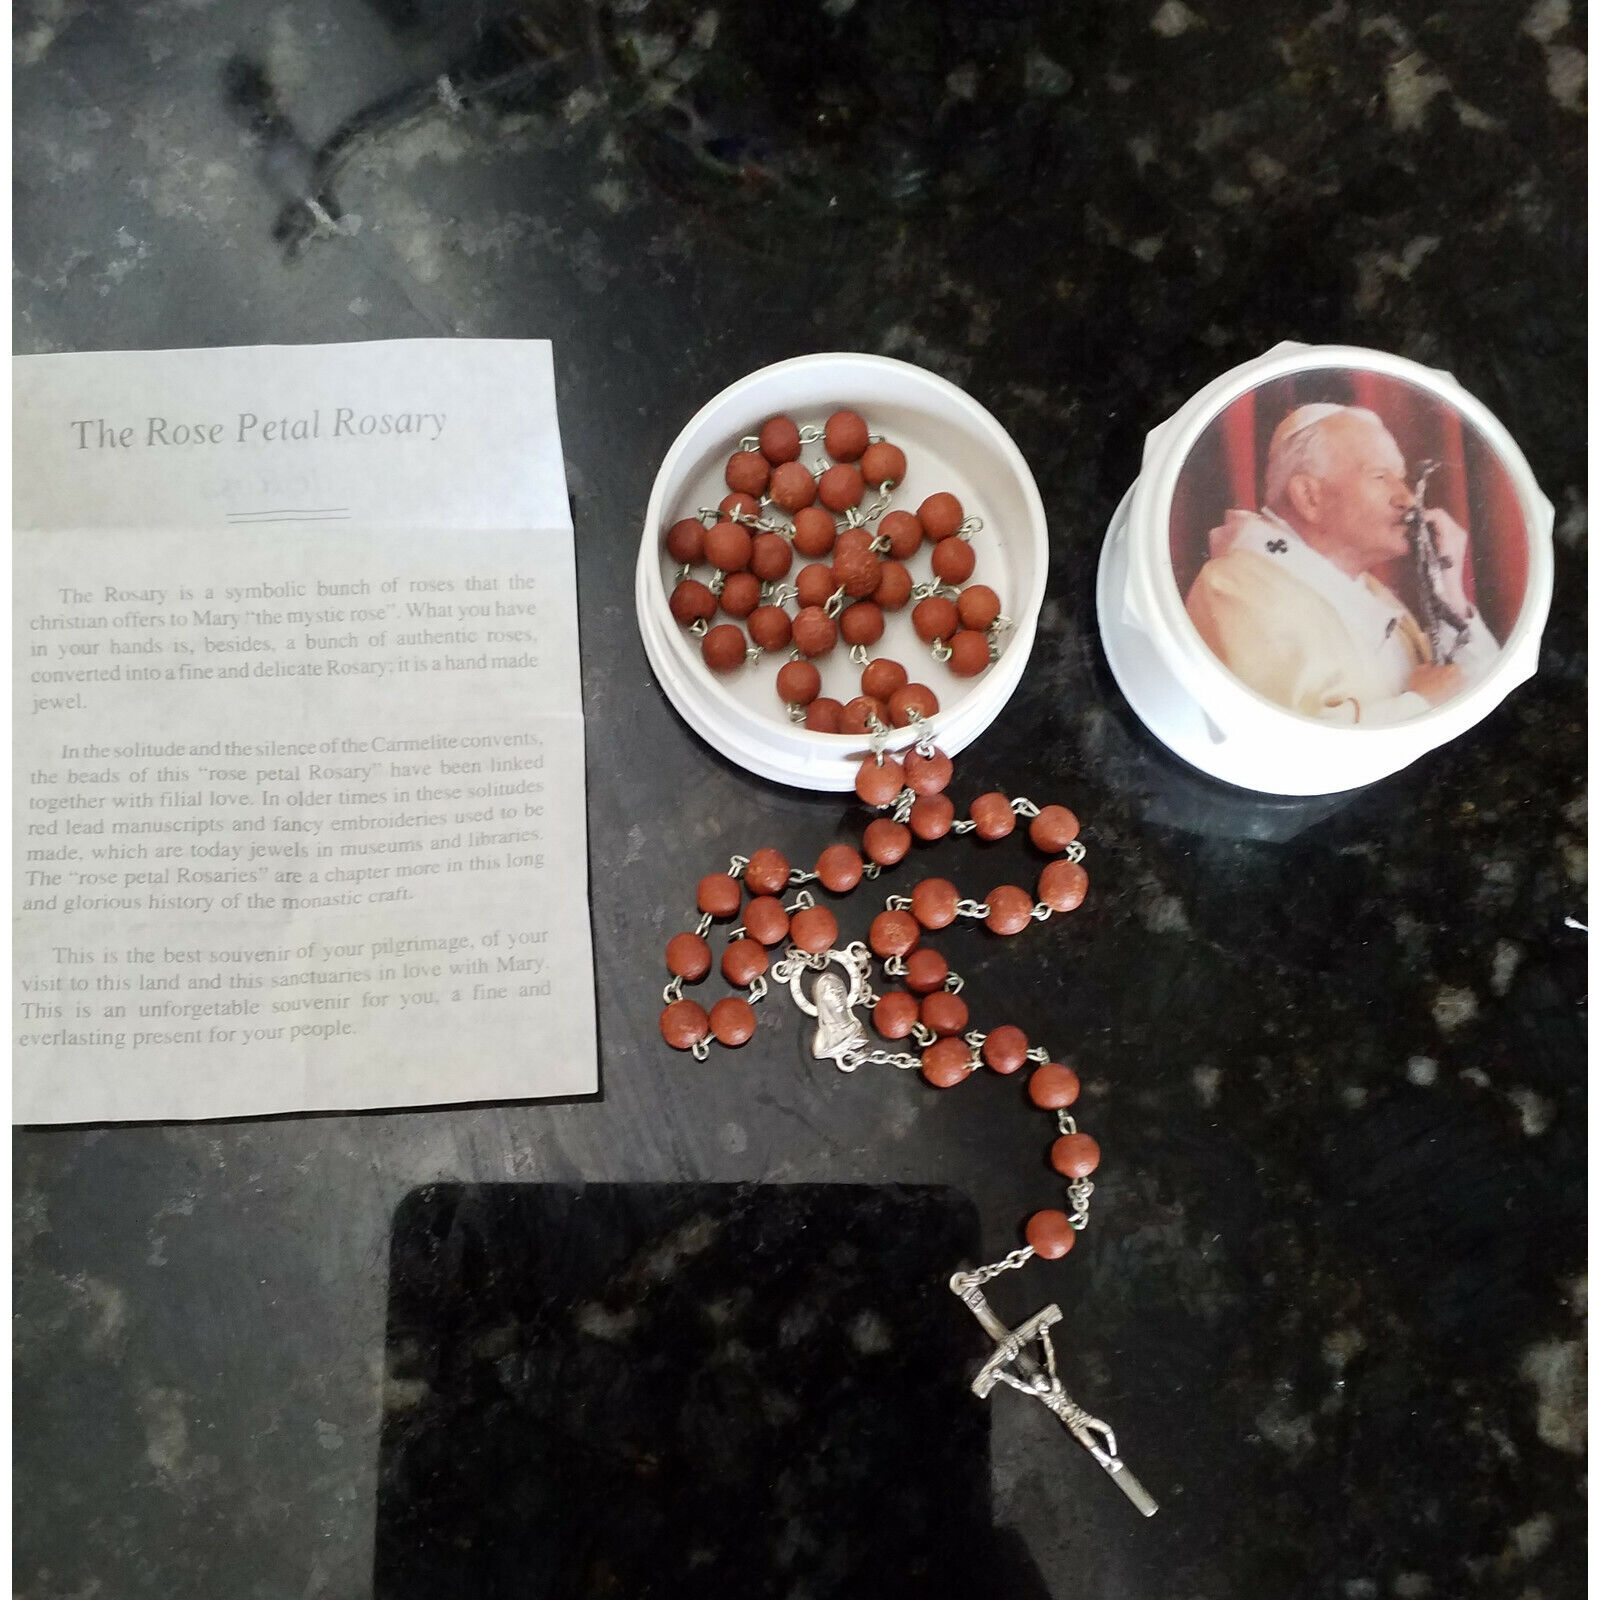  BLESSED BY ST. POPE JOHN PAUL II - Rare vintage Rosary from Vatican City - Wood